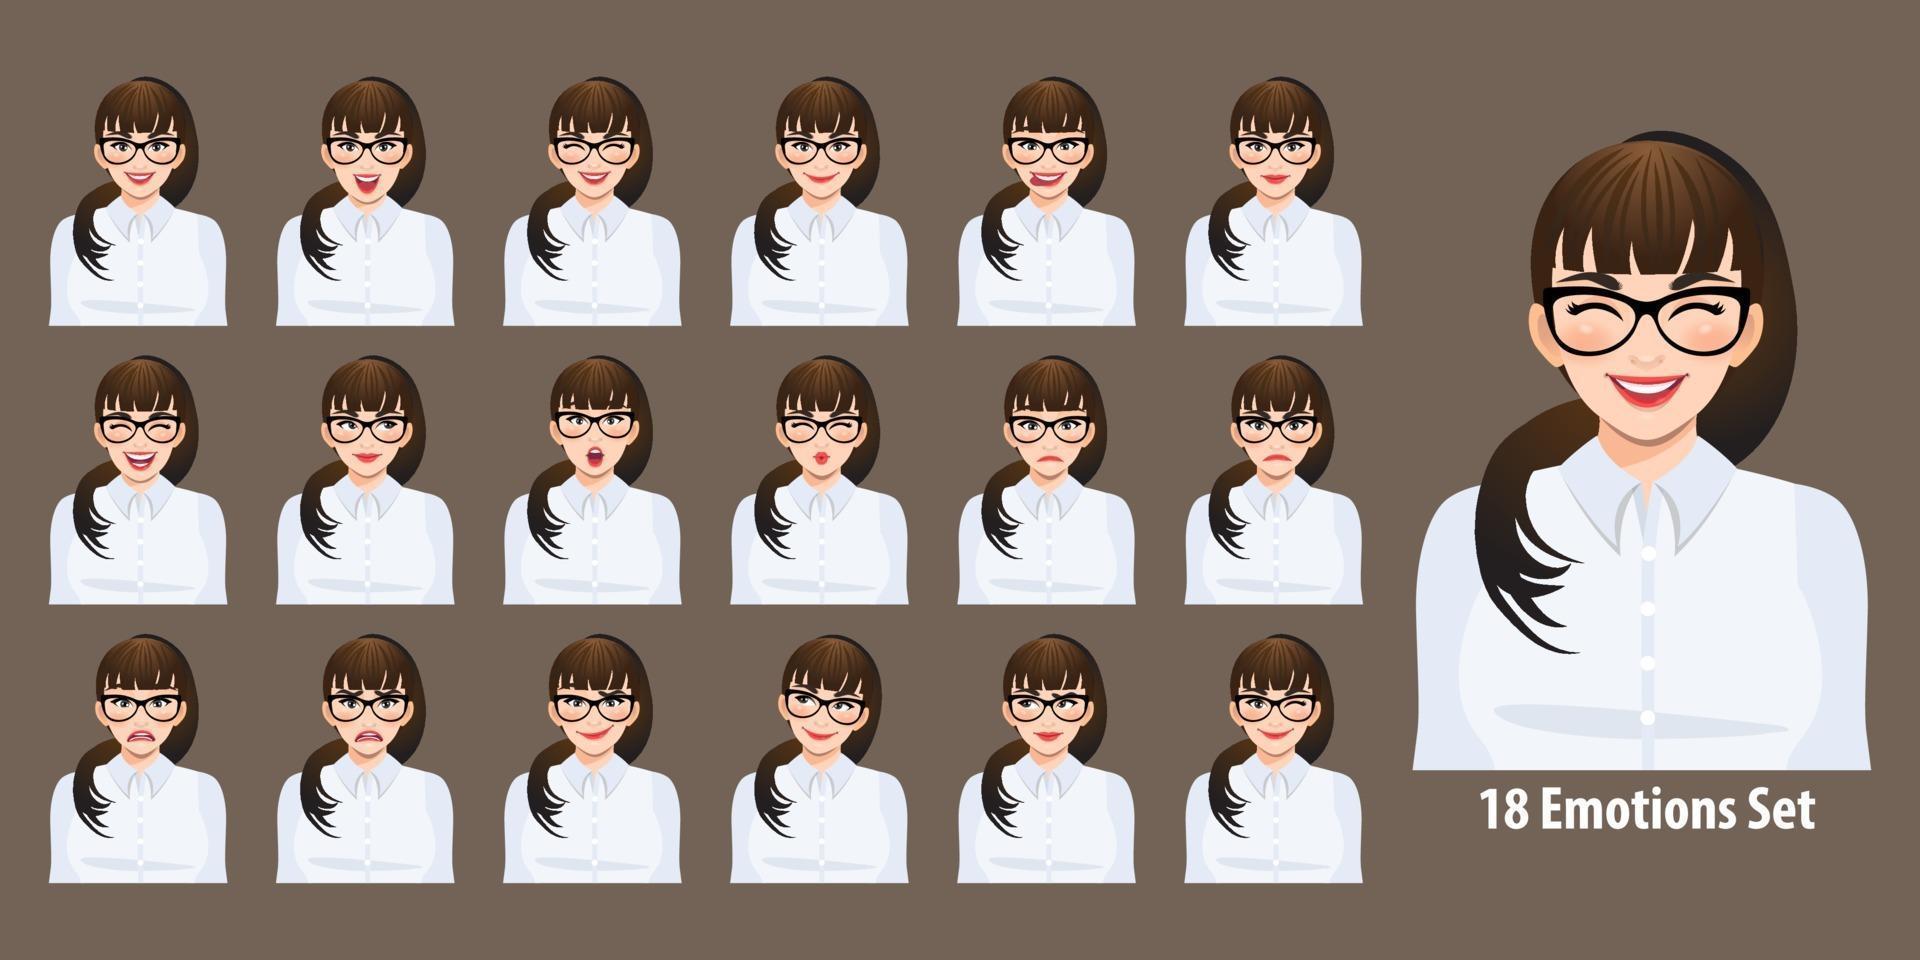 Plus size business woman in white shirt with different facial expressions set isolated in cartoon character style vector illustration